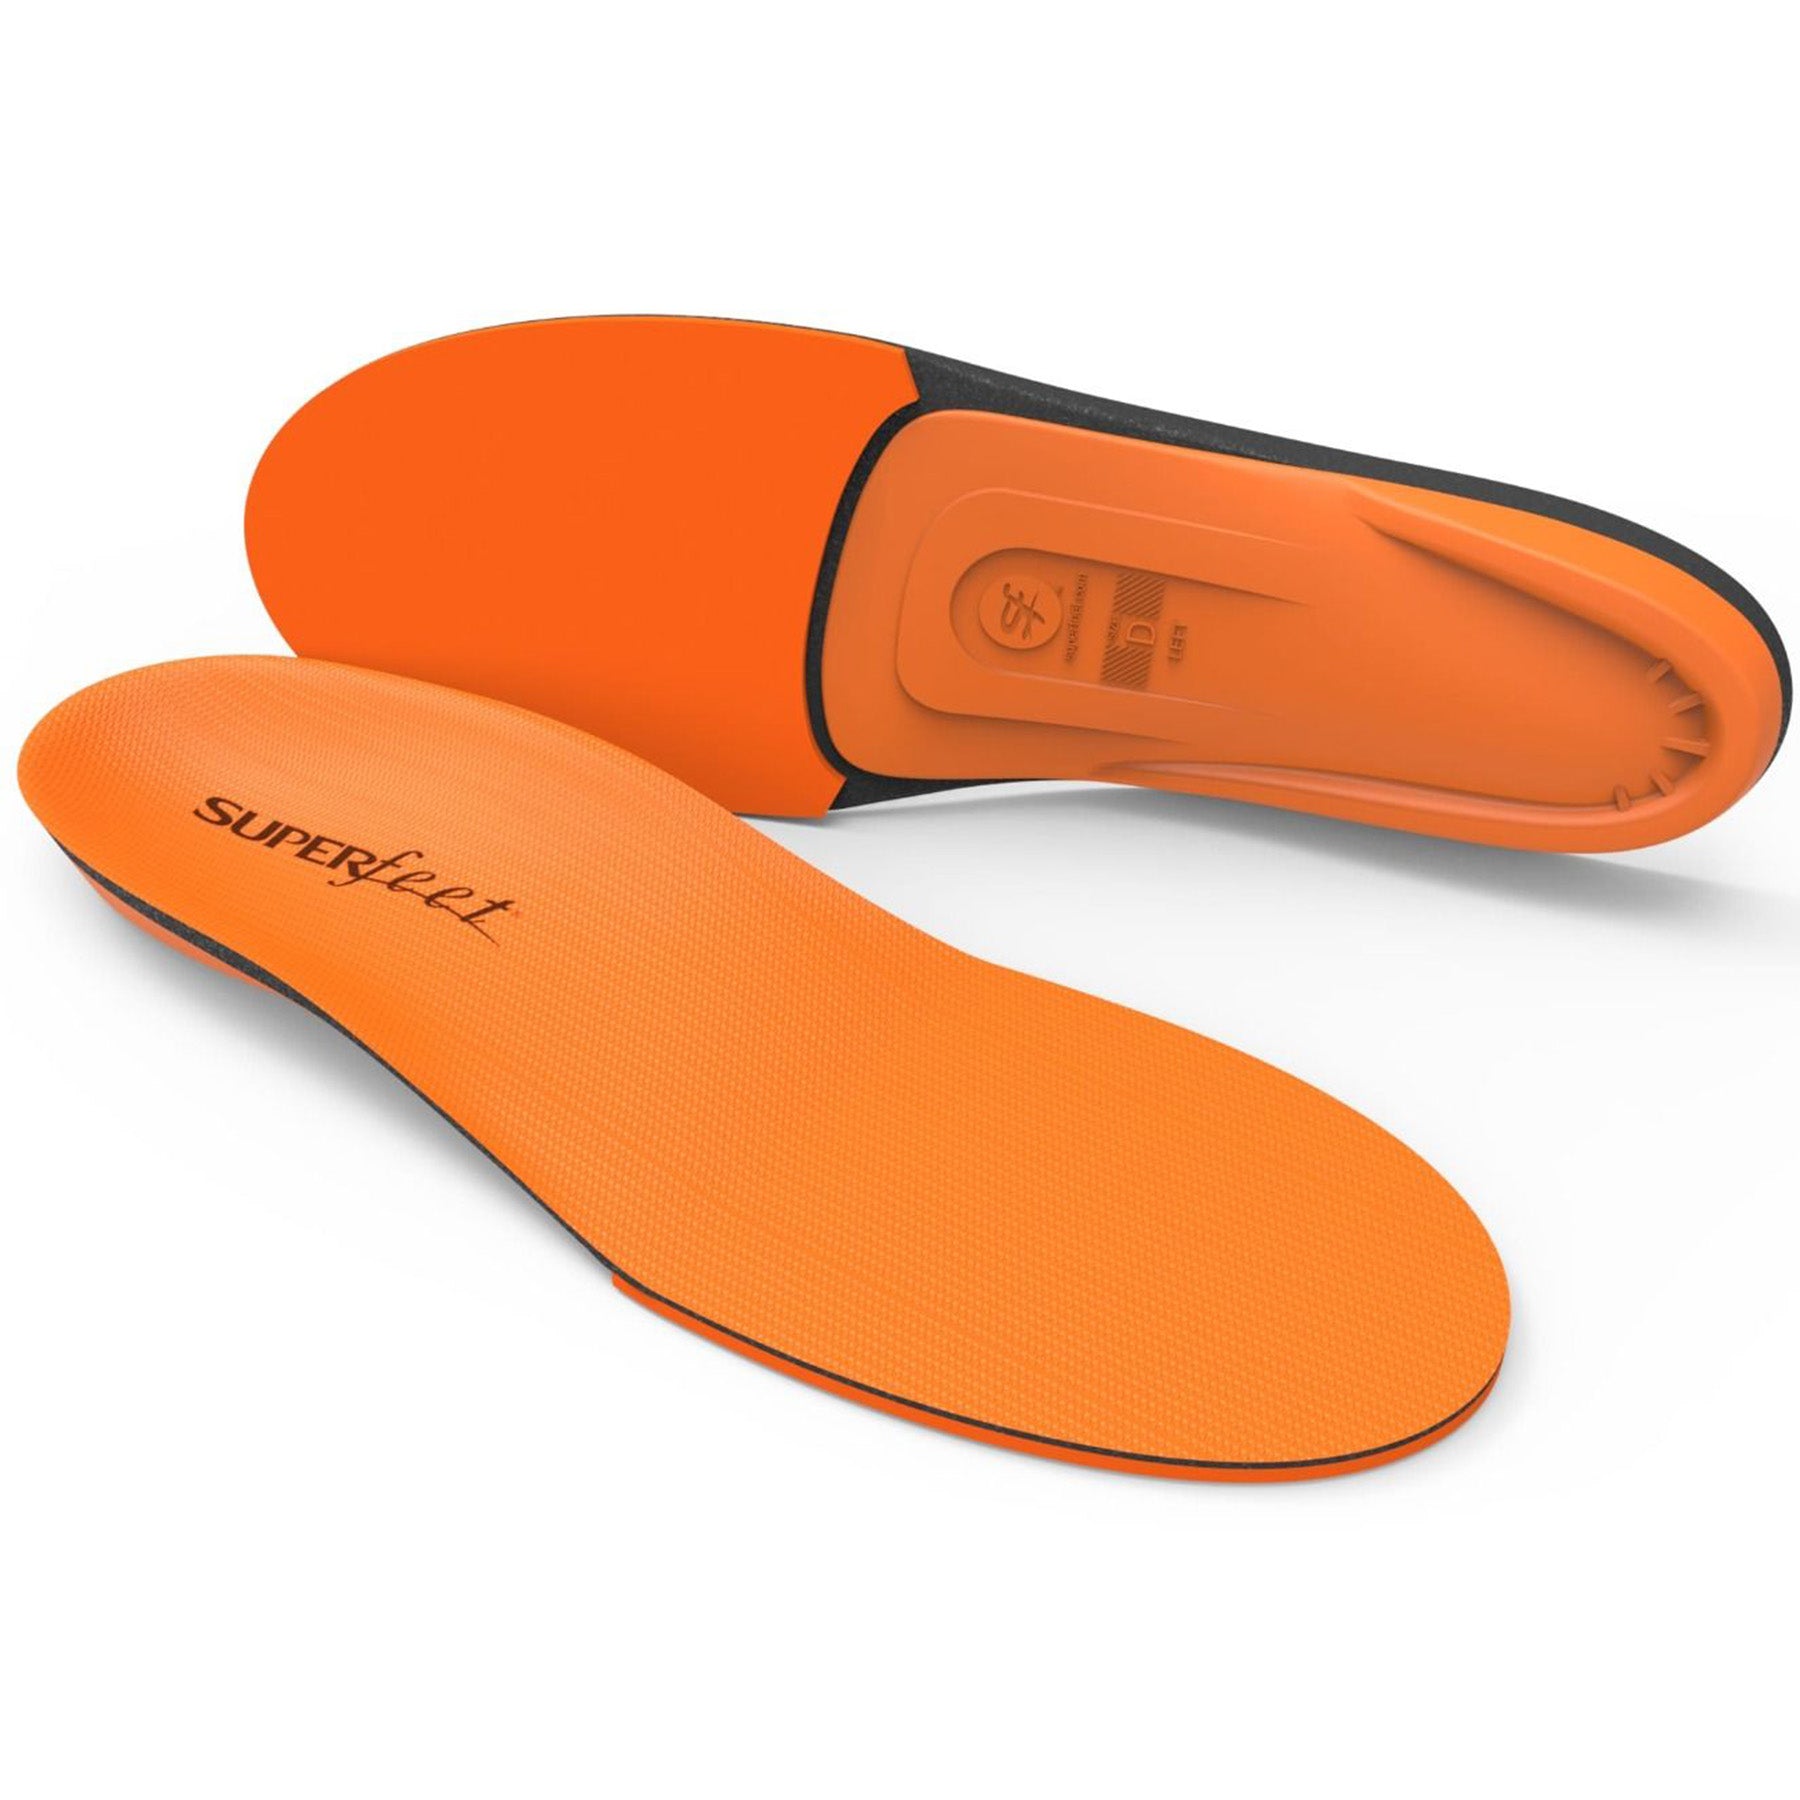 a pair of the orange insoles showing the top and bottom of the pair